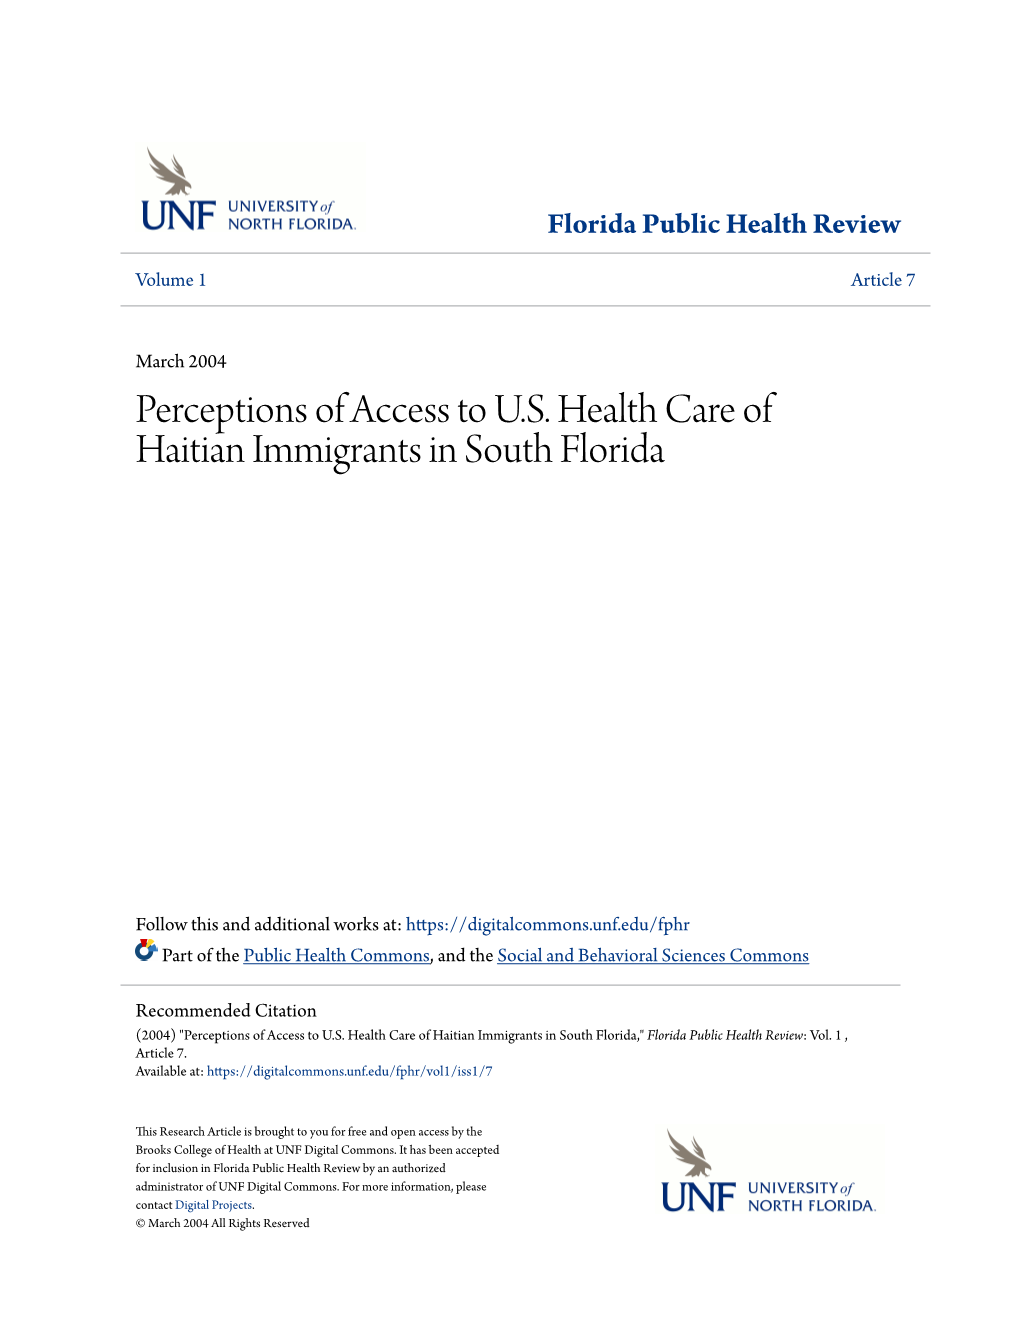 Perceptions of Access to U.S. Health Care of Haitian Immigrants in South Florida